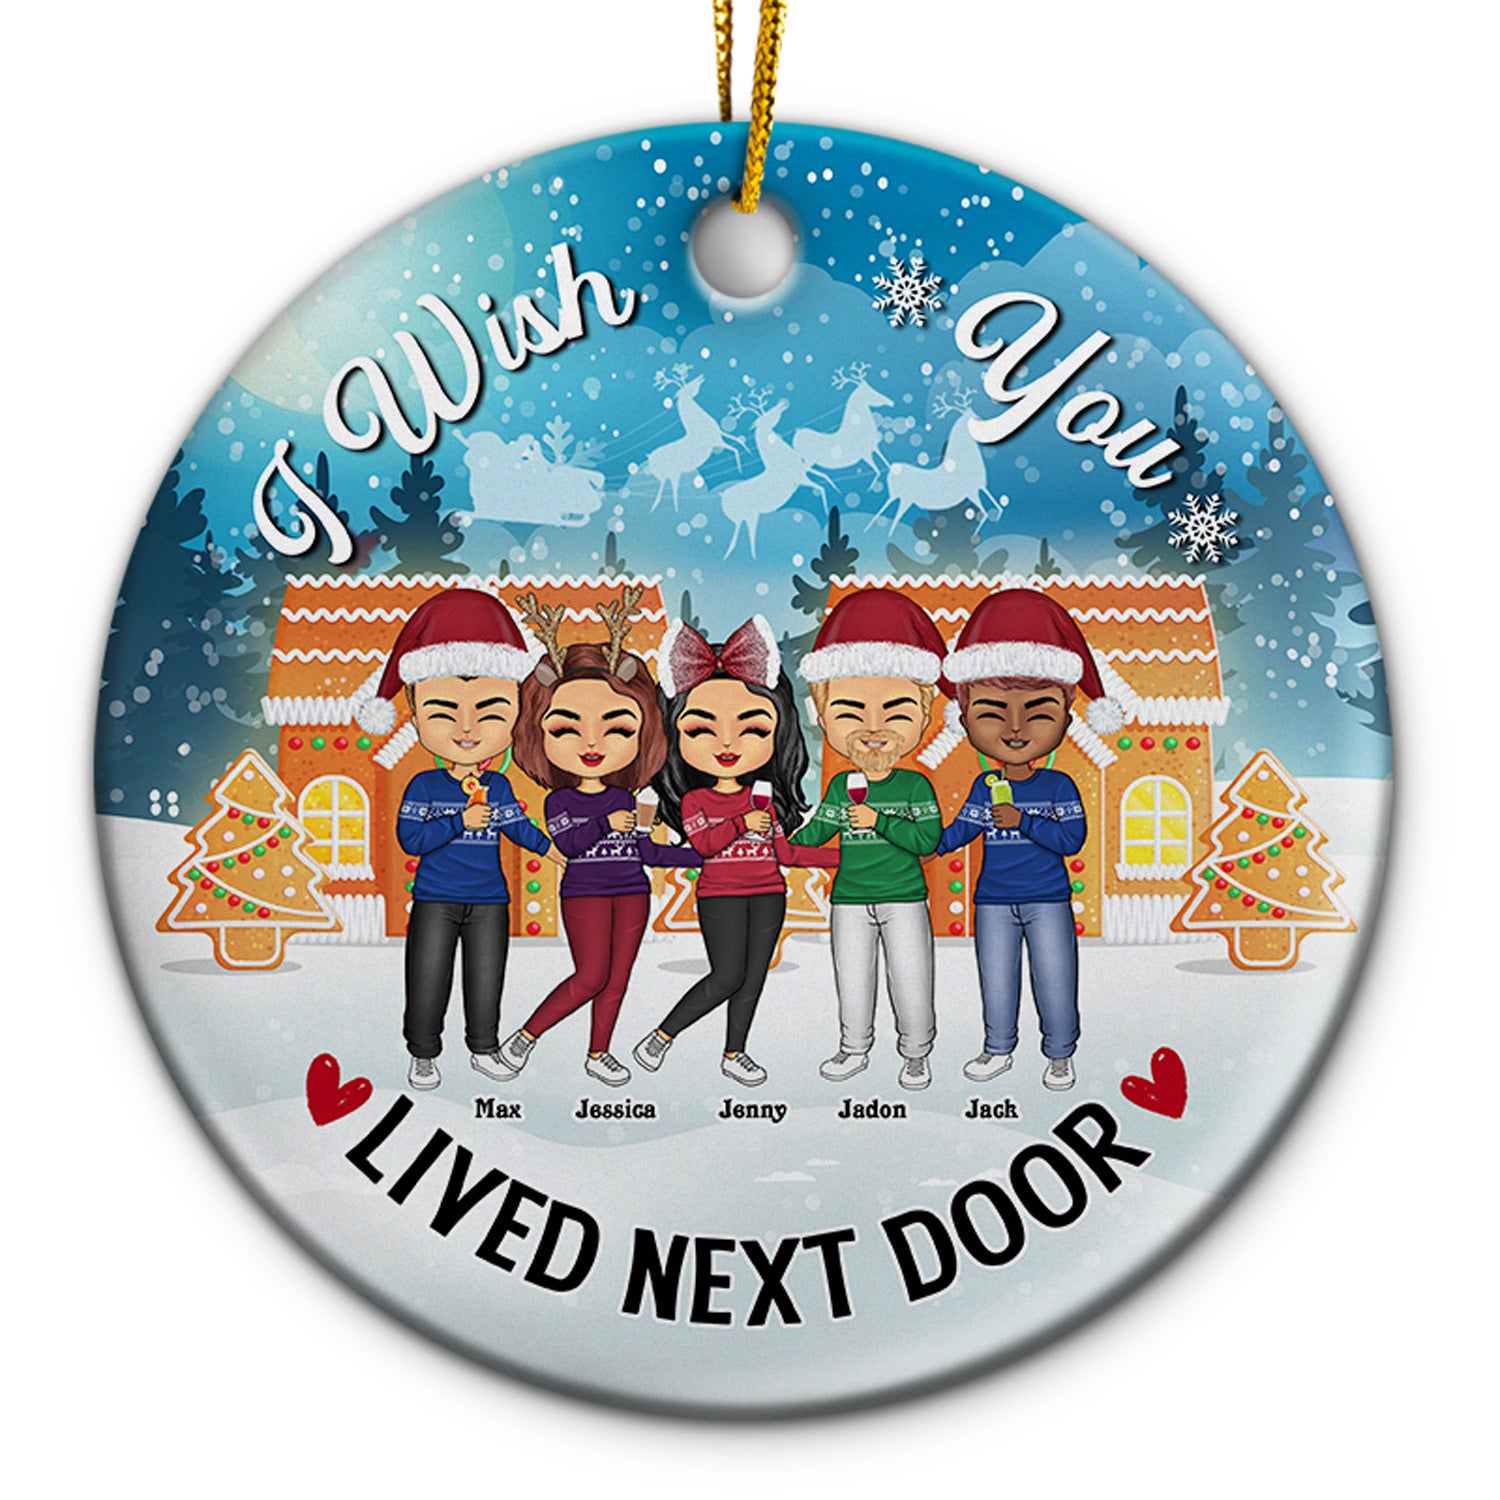 Wish You Lived Next Door - Christmas Besties Gift - Personalized Custom Circle Ceramic Ornament